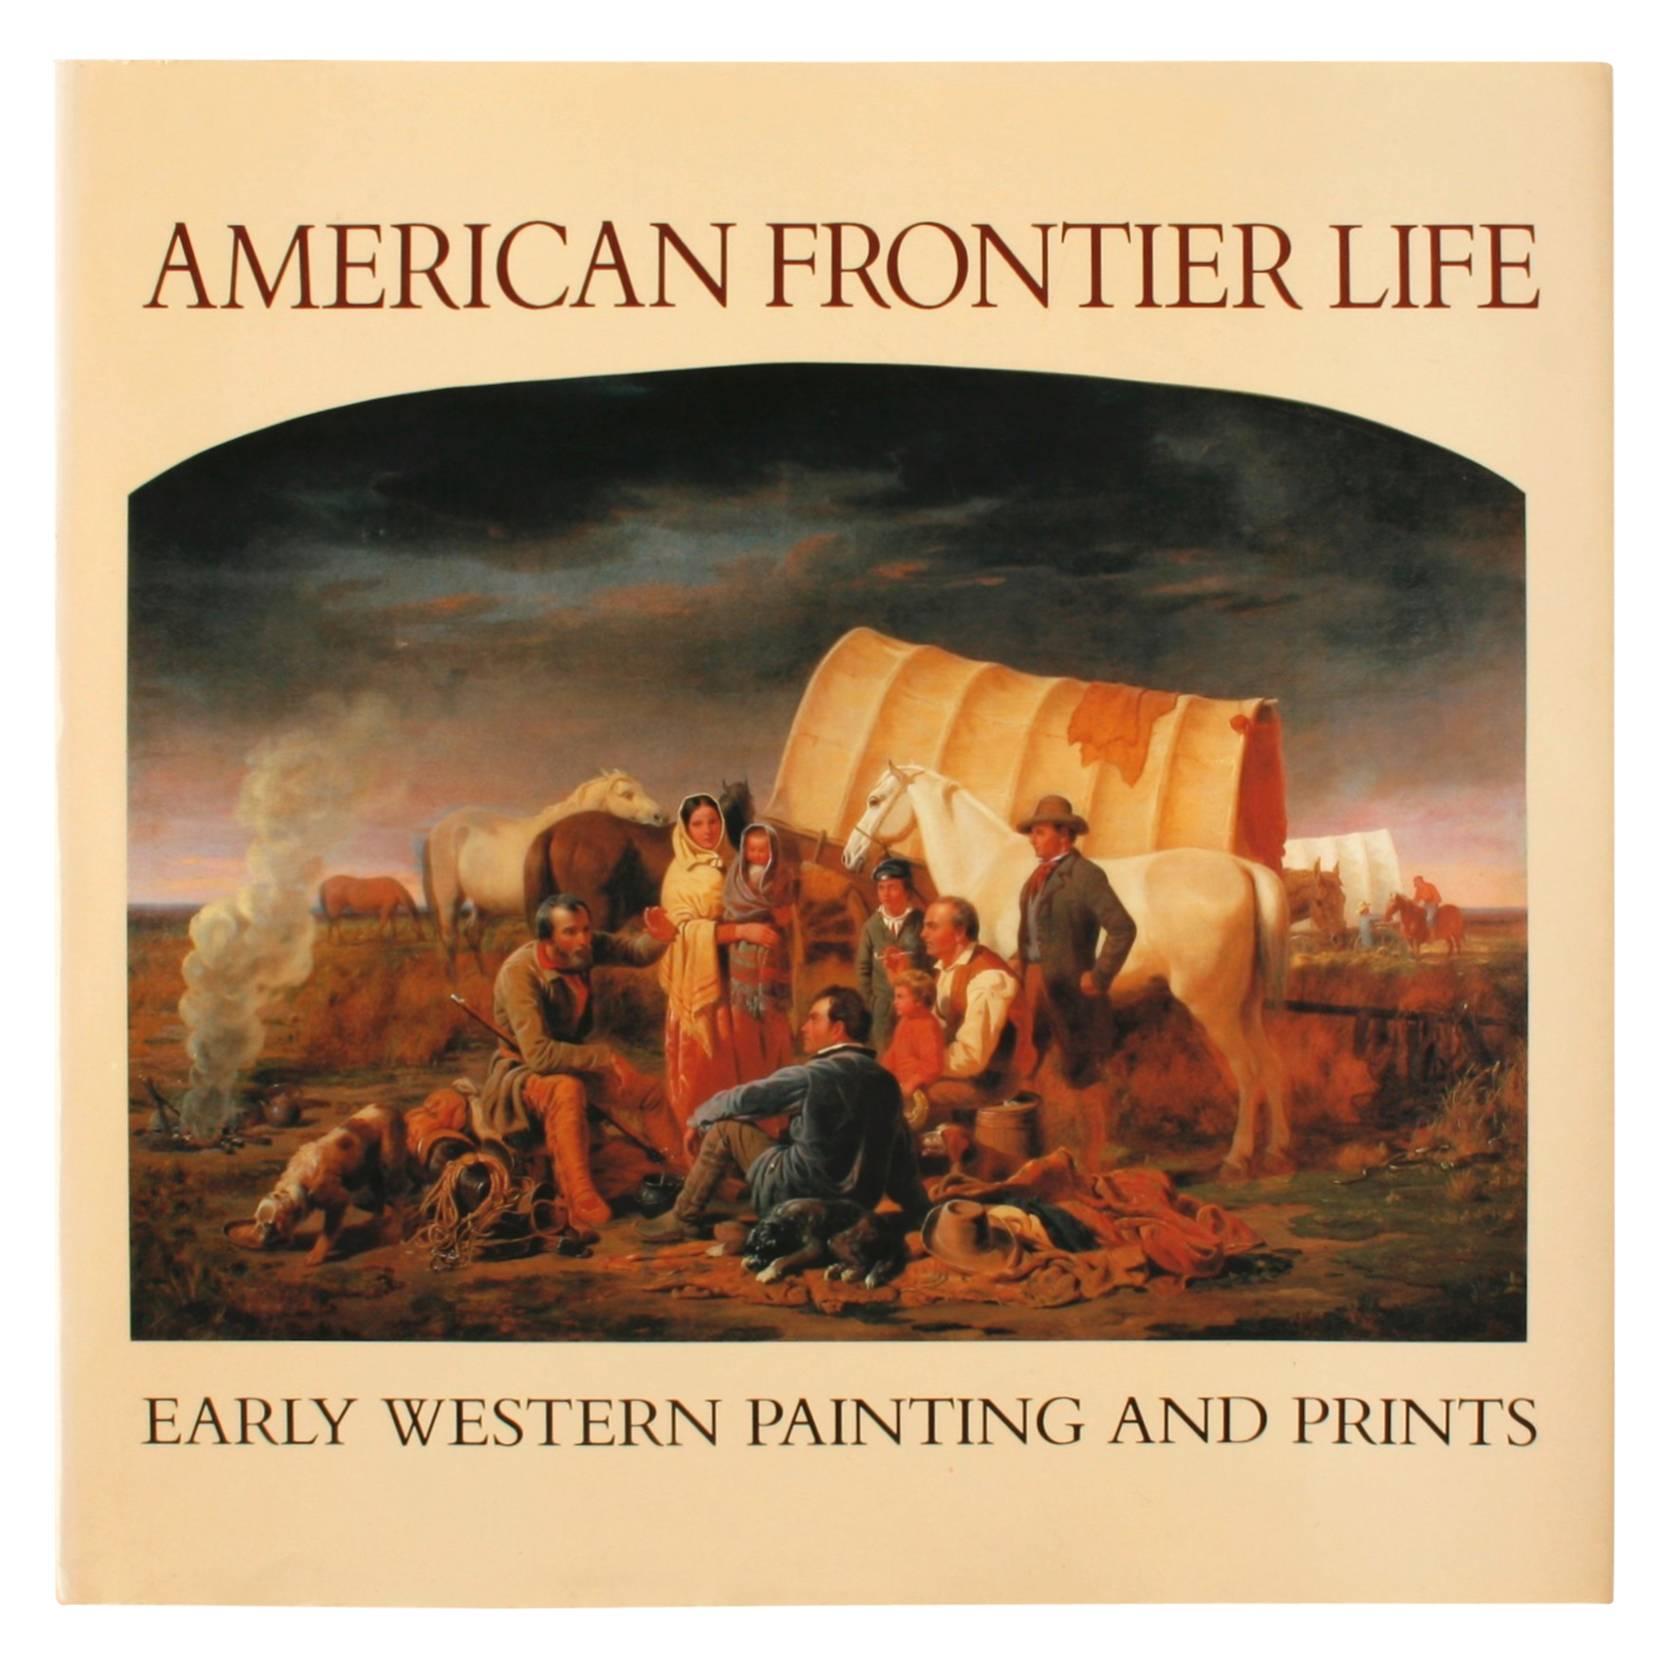 American Frontier Life, Early Western Painting and Prints